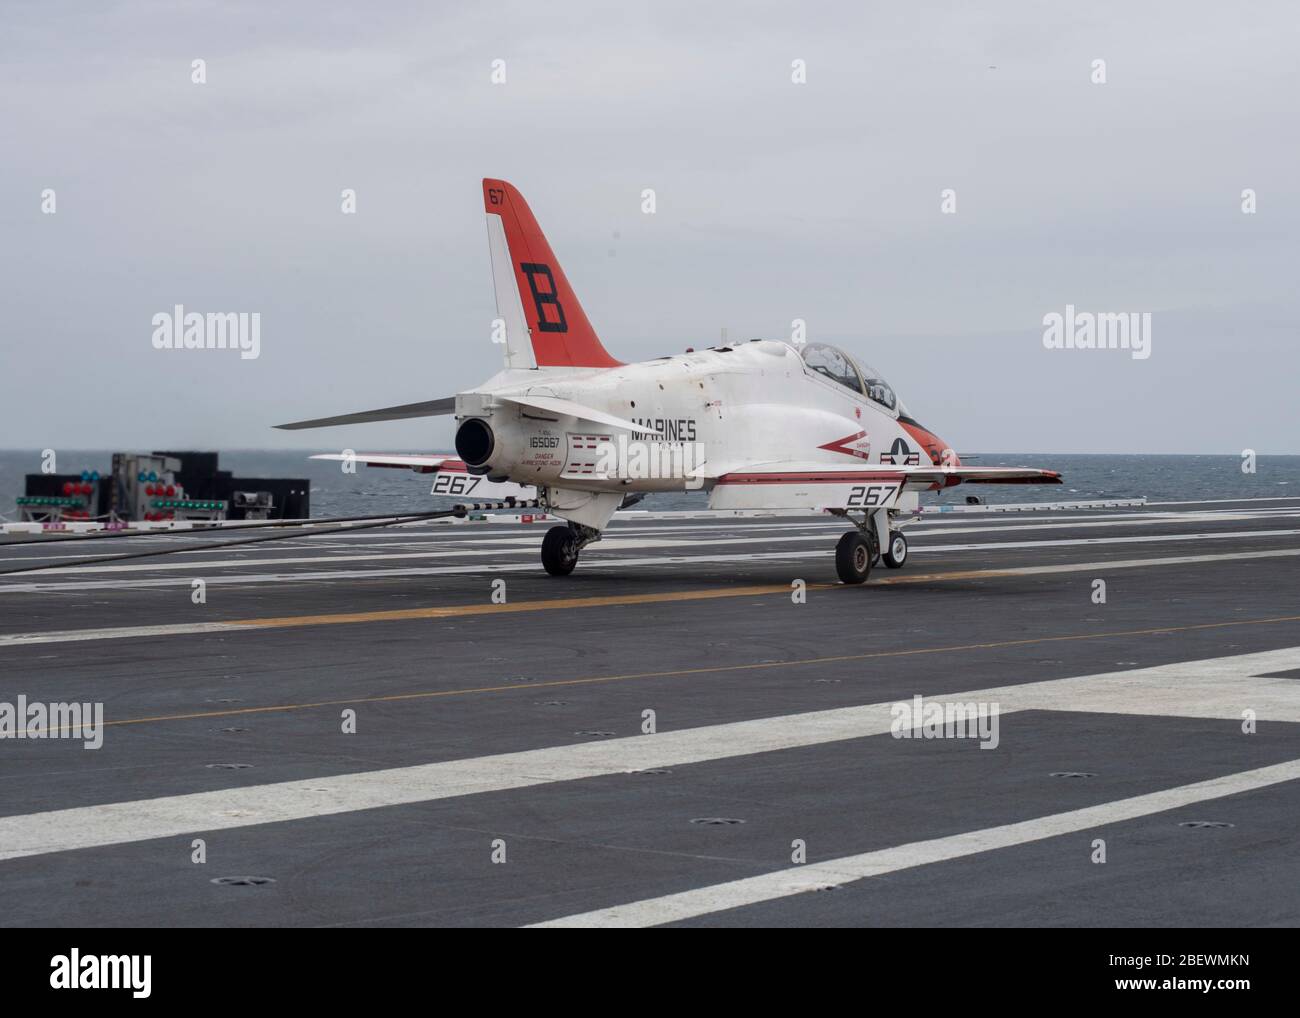 Lt. j.g. Cade Warlick lands a T-45C Goshawk, attached to Training Air Wing (TAW) 2, on USS Gerald R. Ford's (CVN 78) flight deck marking the 2,000 trap on Ford's advanced arresting gear (AAG) April 8, 2020. Ford is underway in the Atlantic Ocean conducting carrier qualifications. (U.S. Navy photo by Mass Communication Specialist Seaman Apprentice Conner Foy) Stock Photo